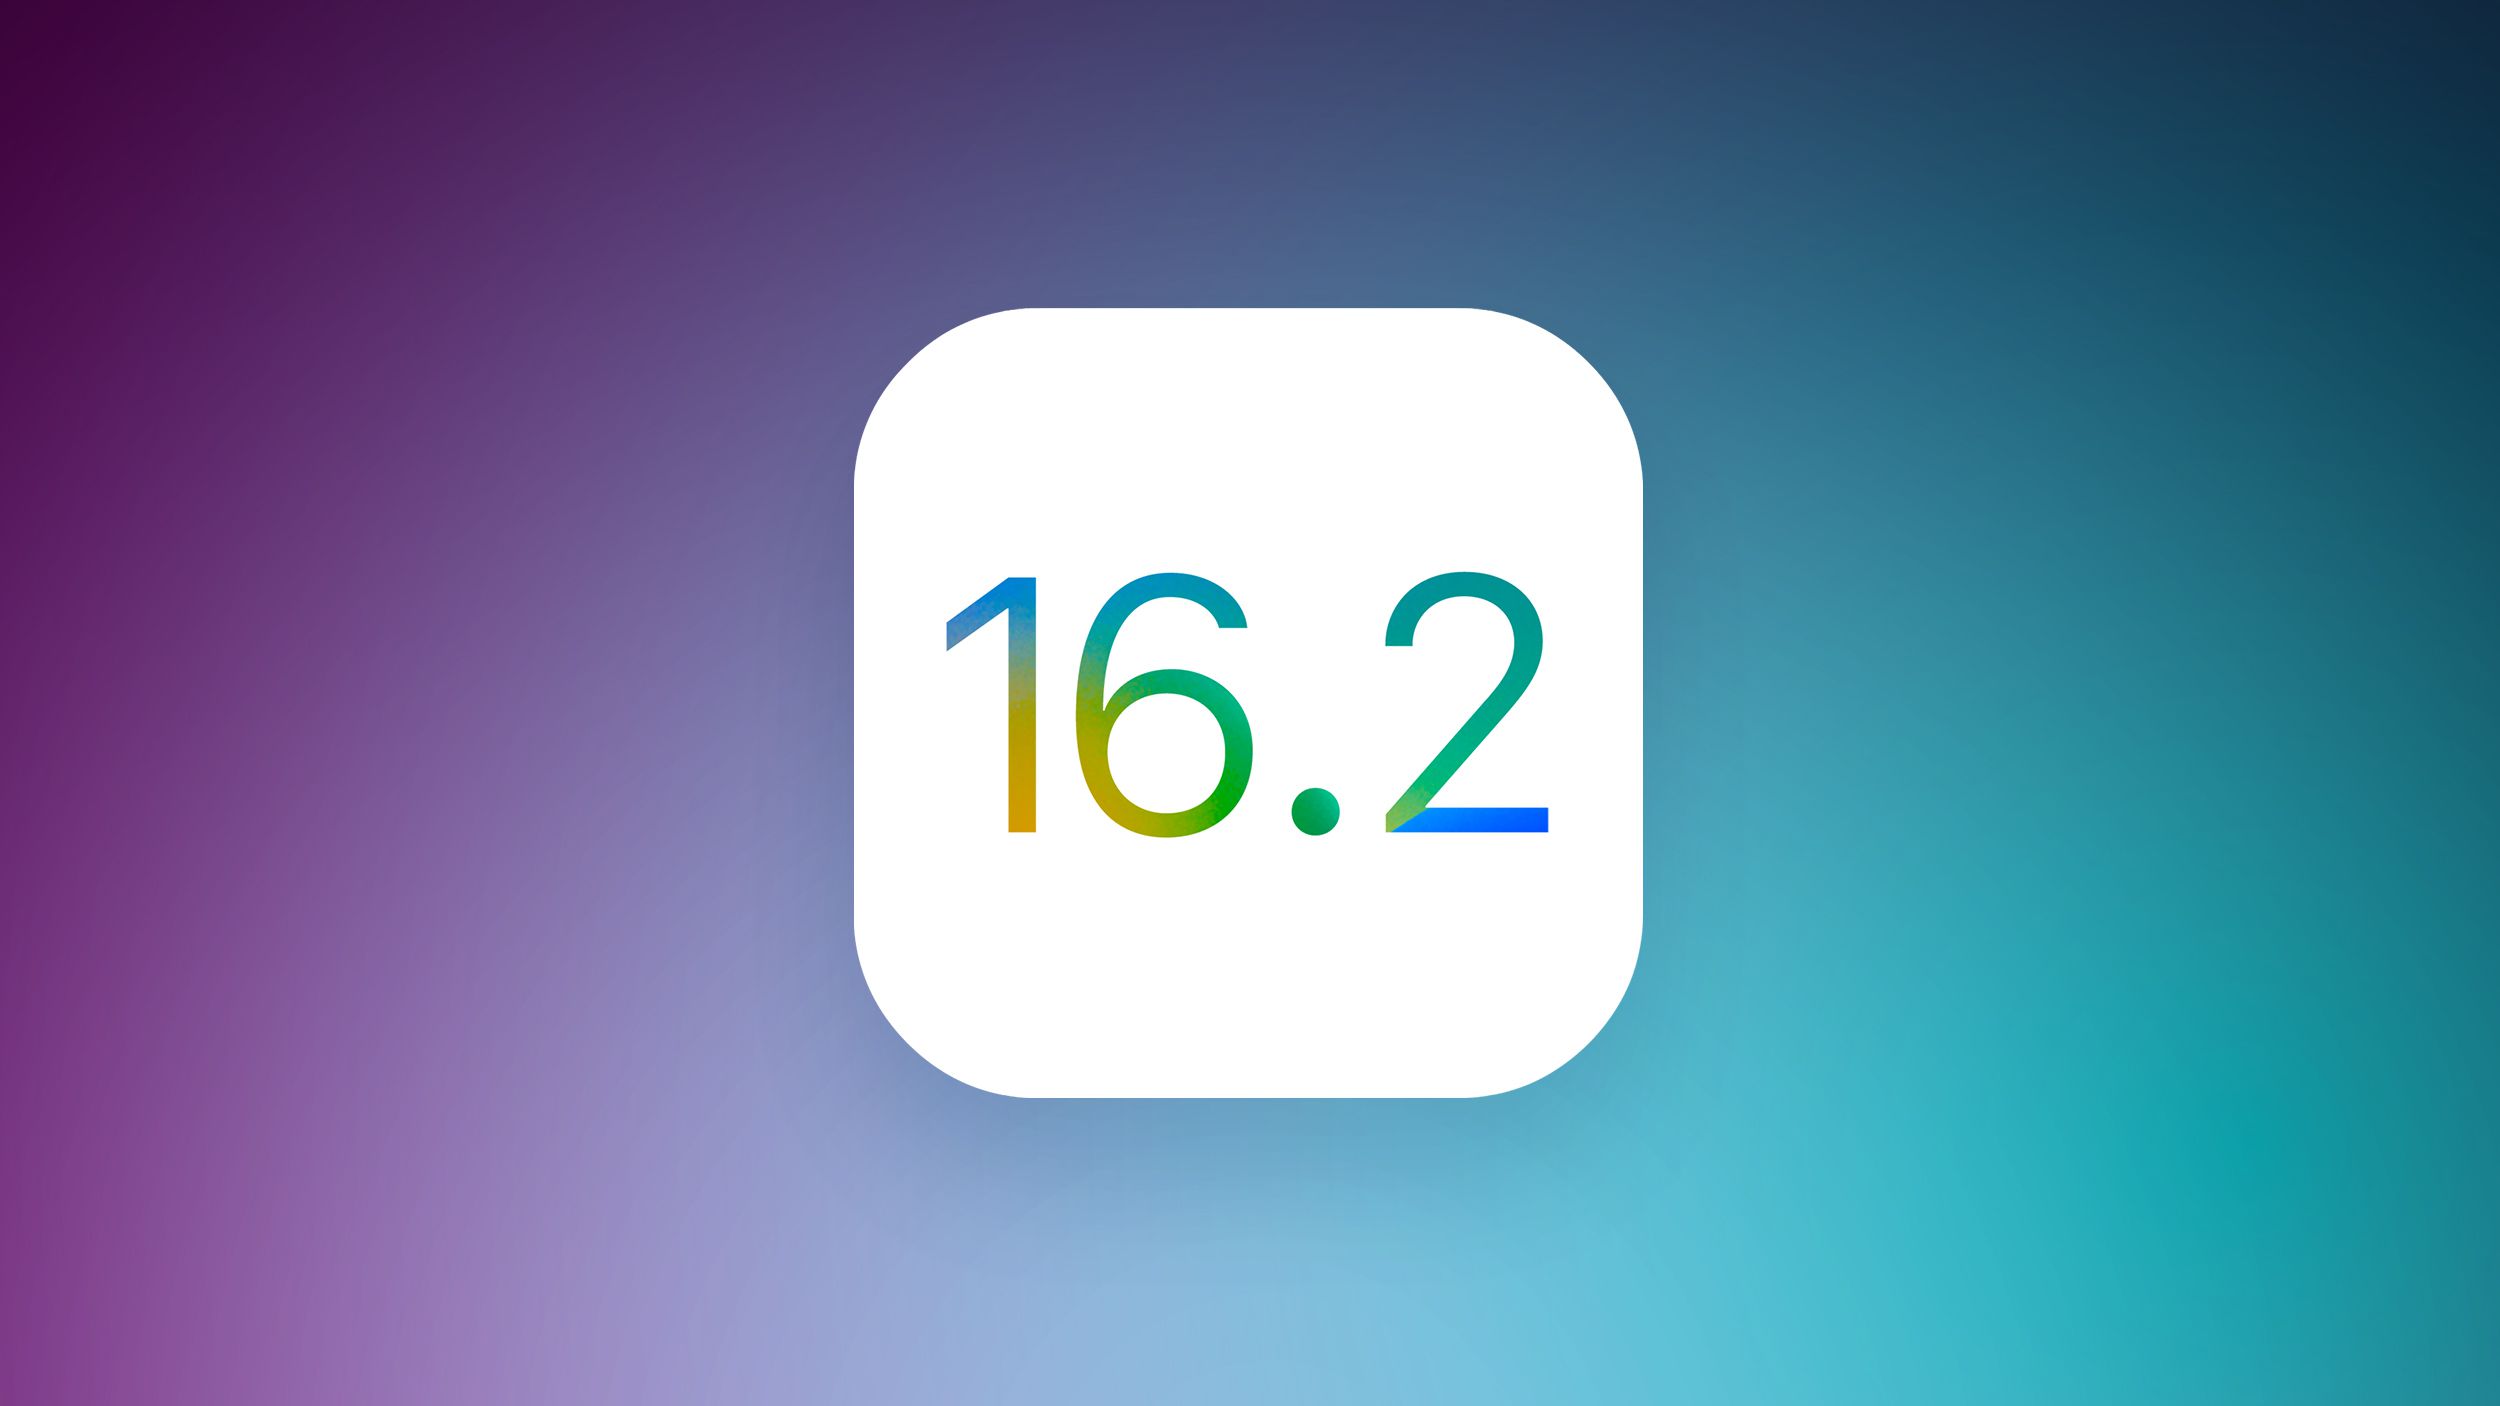 When Will iOS 16.2 Be Released?